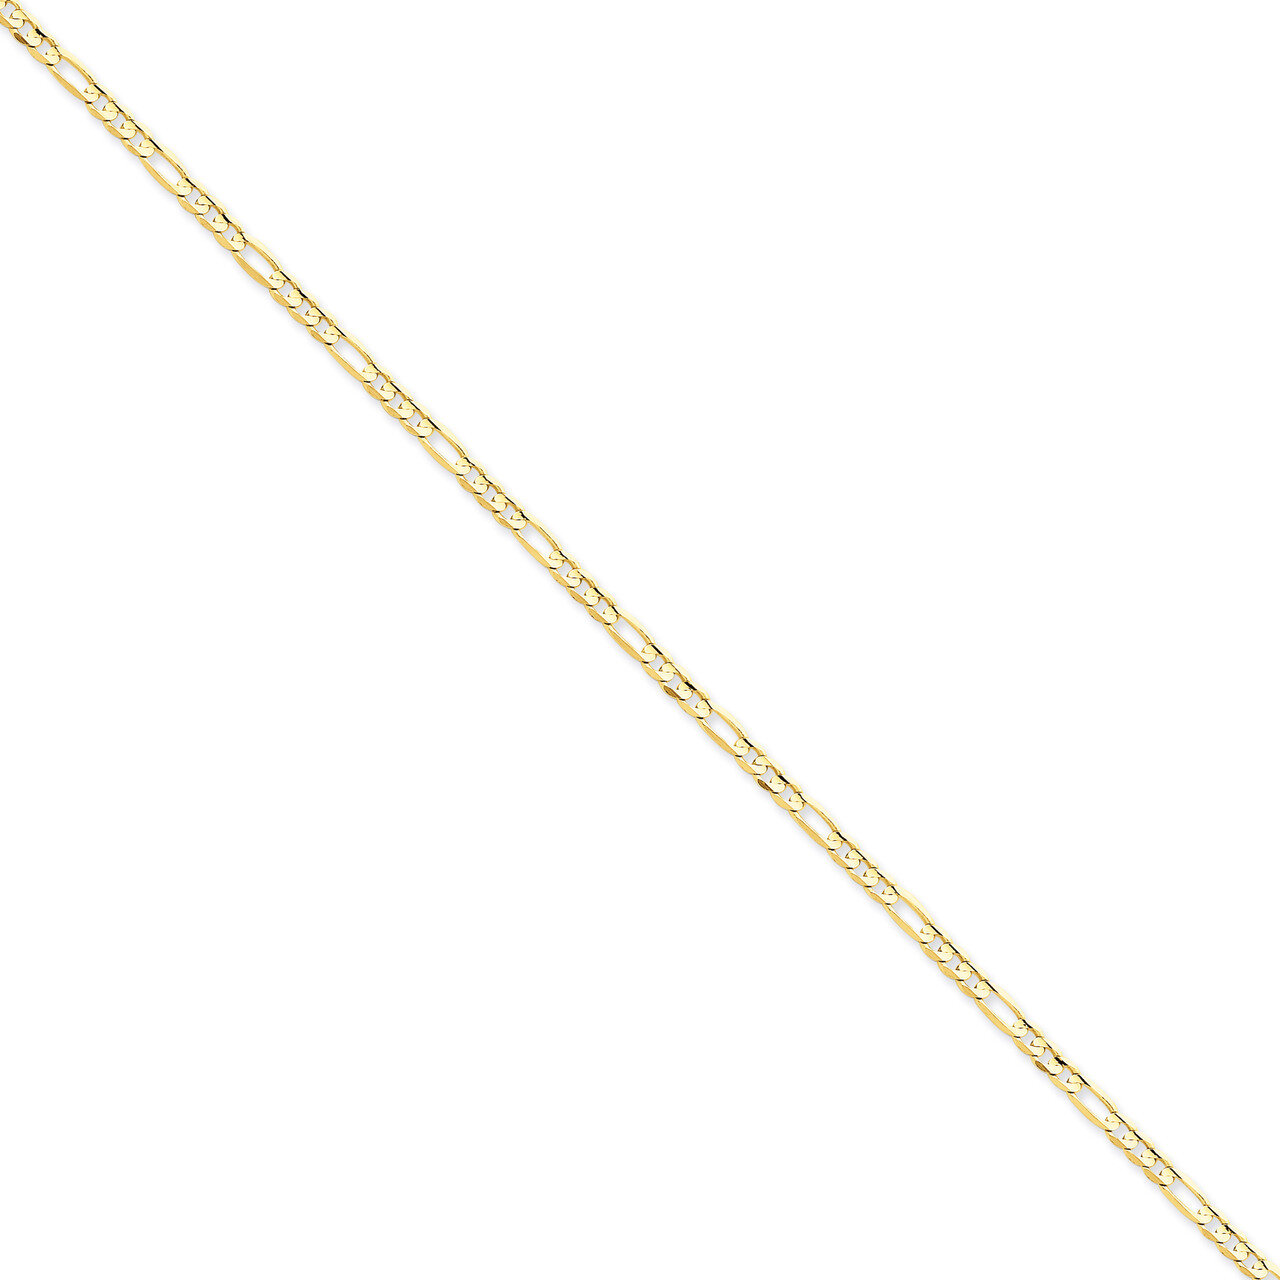 3mm Concave Open Figaro Chain 24 Inch 14k Gold LFG080-24